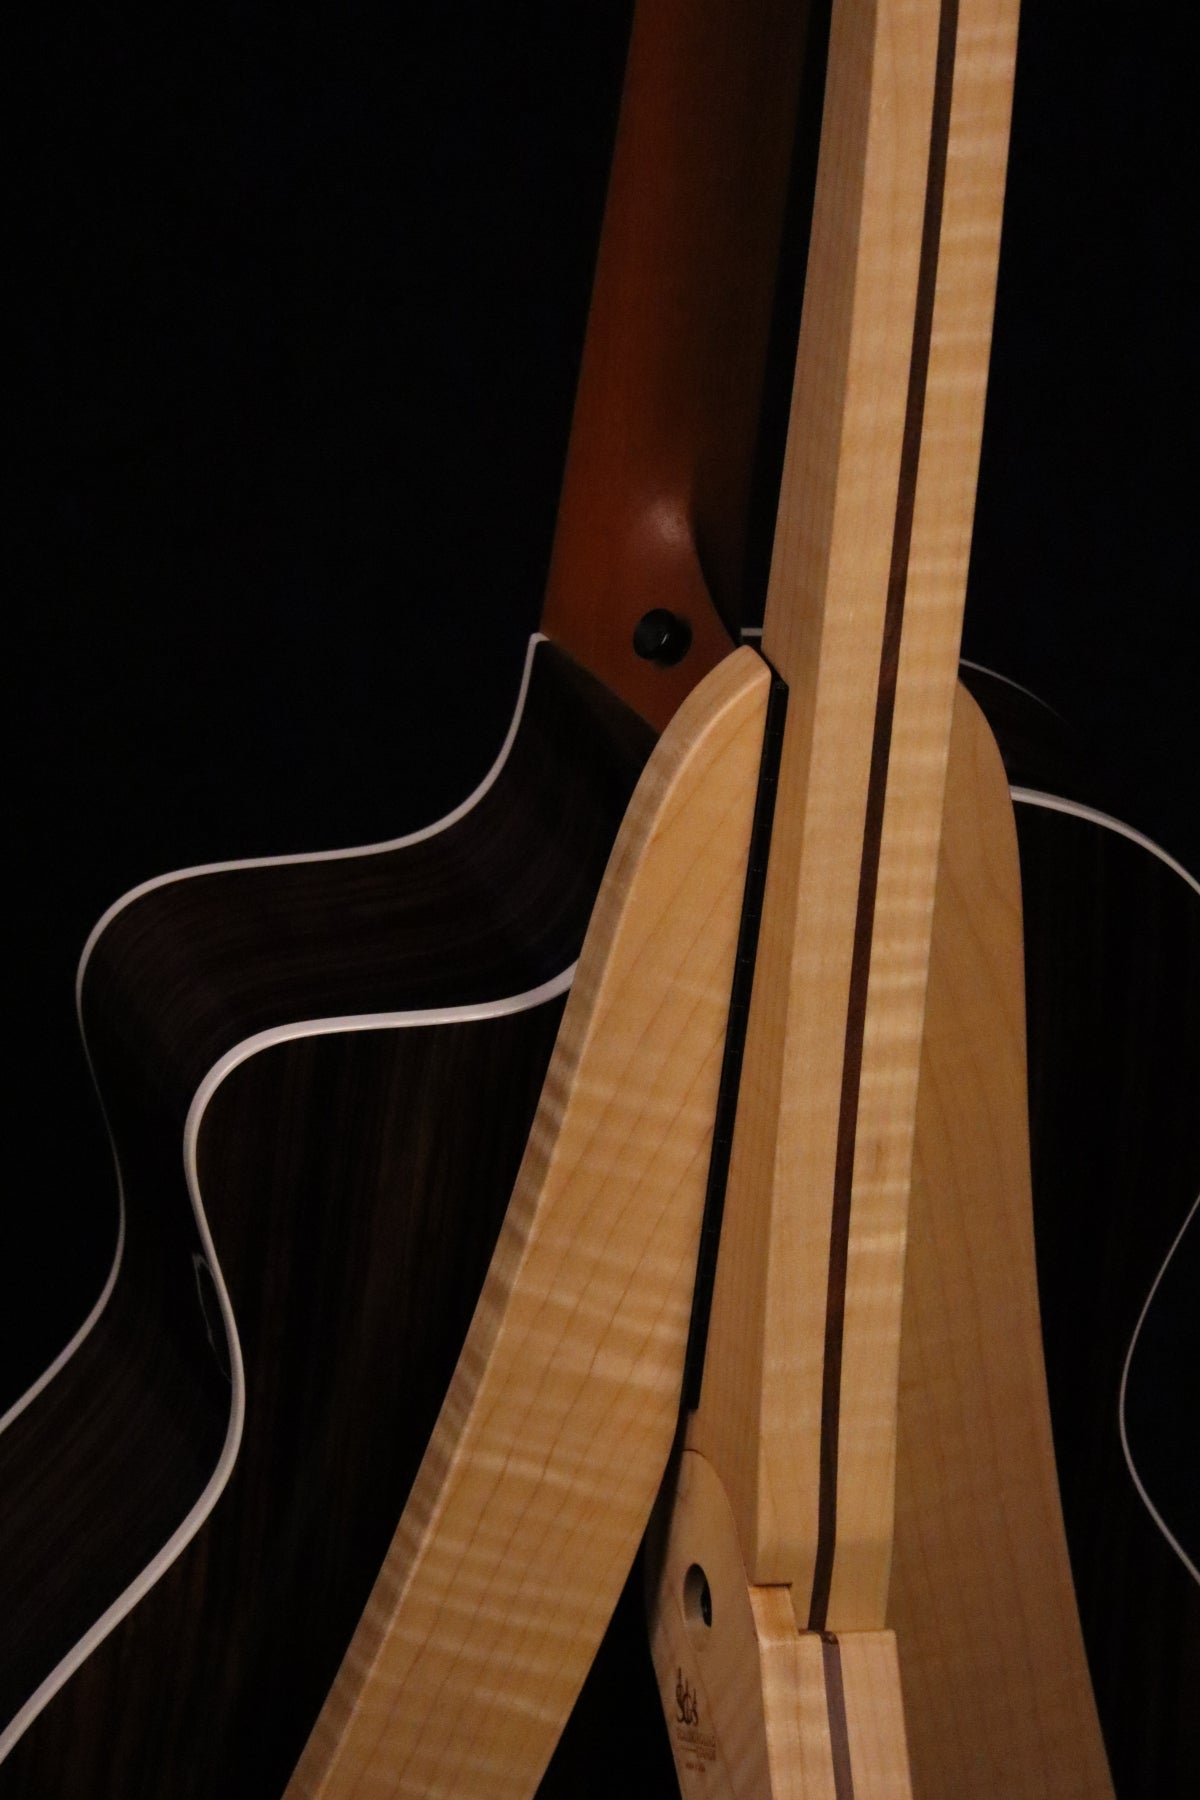 Folding curly maple and walnut wood guitar floor stand closeup rear image with Taylor guitar